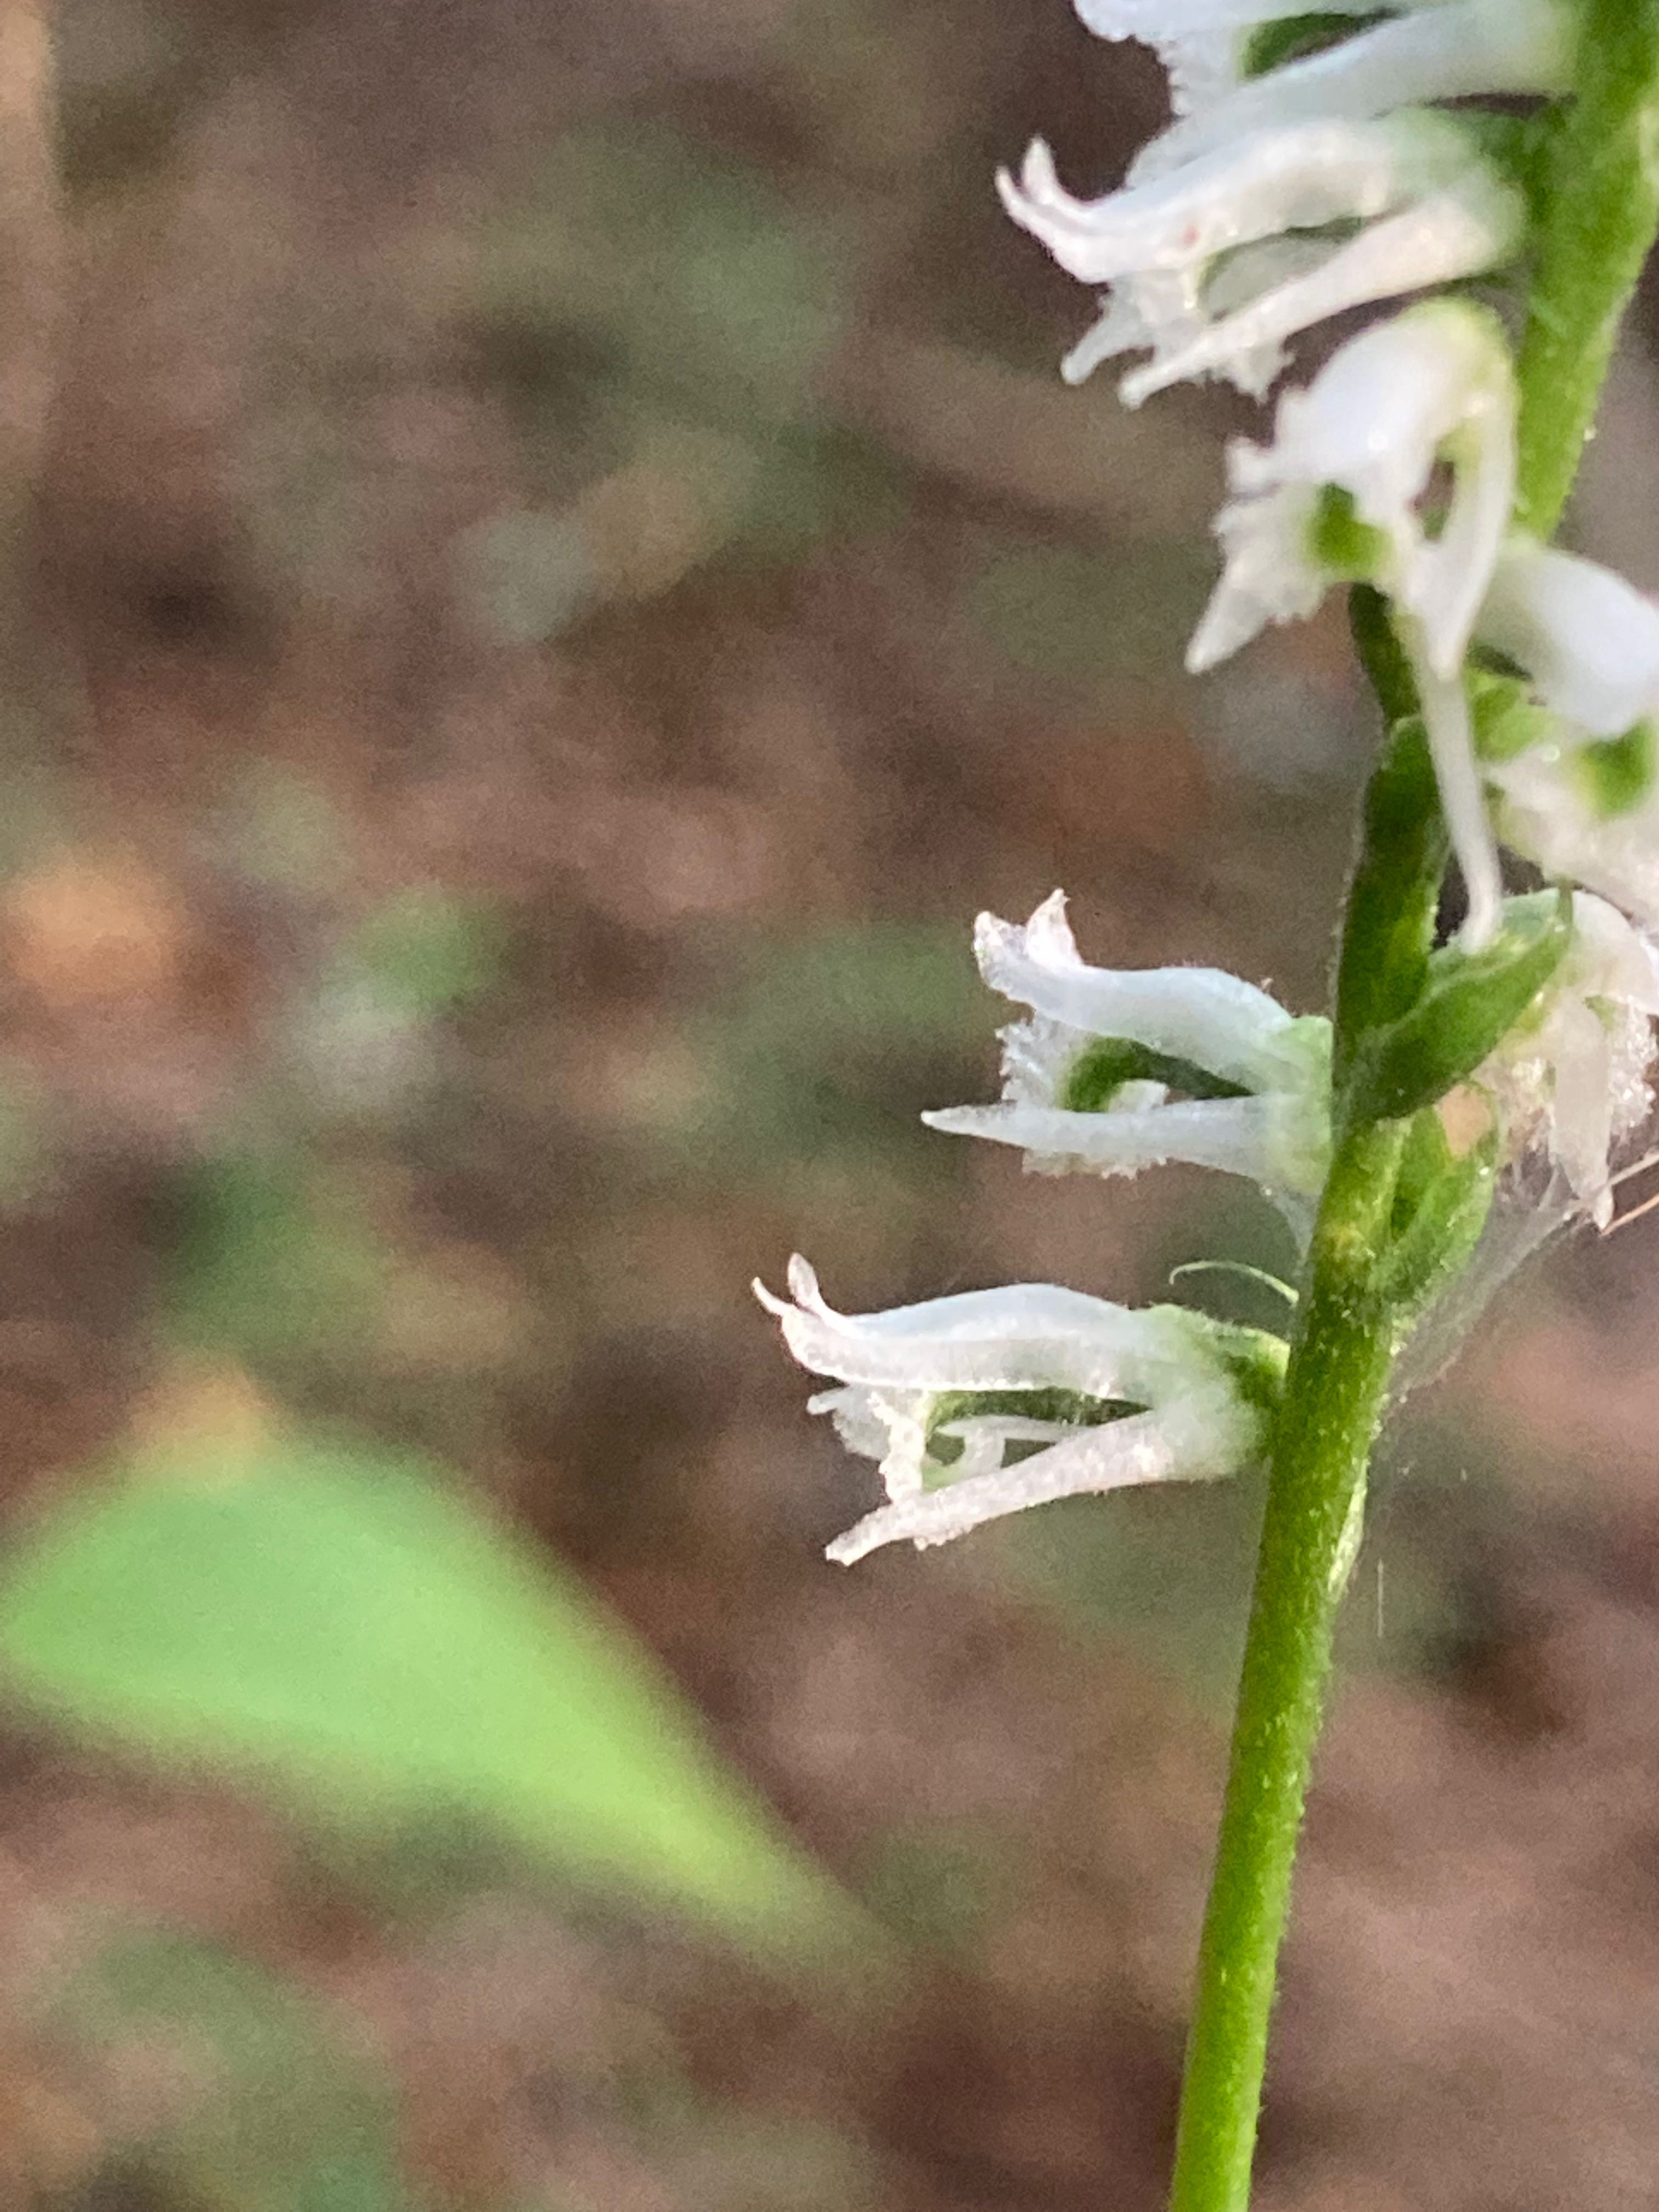 The Scientific Name is Spiranthes lacera var. gracilis. You will likely hear them called Southern Slender Ladies'-tresses, Ladies' Tresses. This picture shows the The completely white lateral sepals are held perpendicular to the stem, and are acuminate in shape. The lip is papillate on the upper surface near the middle and green in the center. of Spiranthes lacera var. gracilis